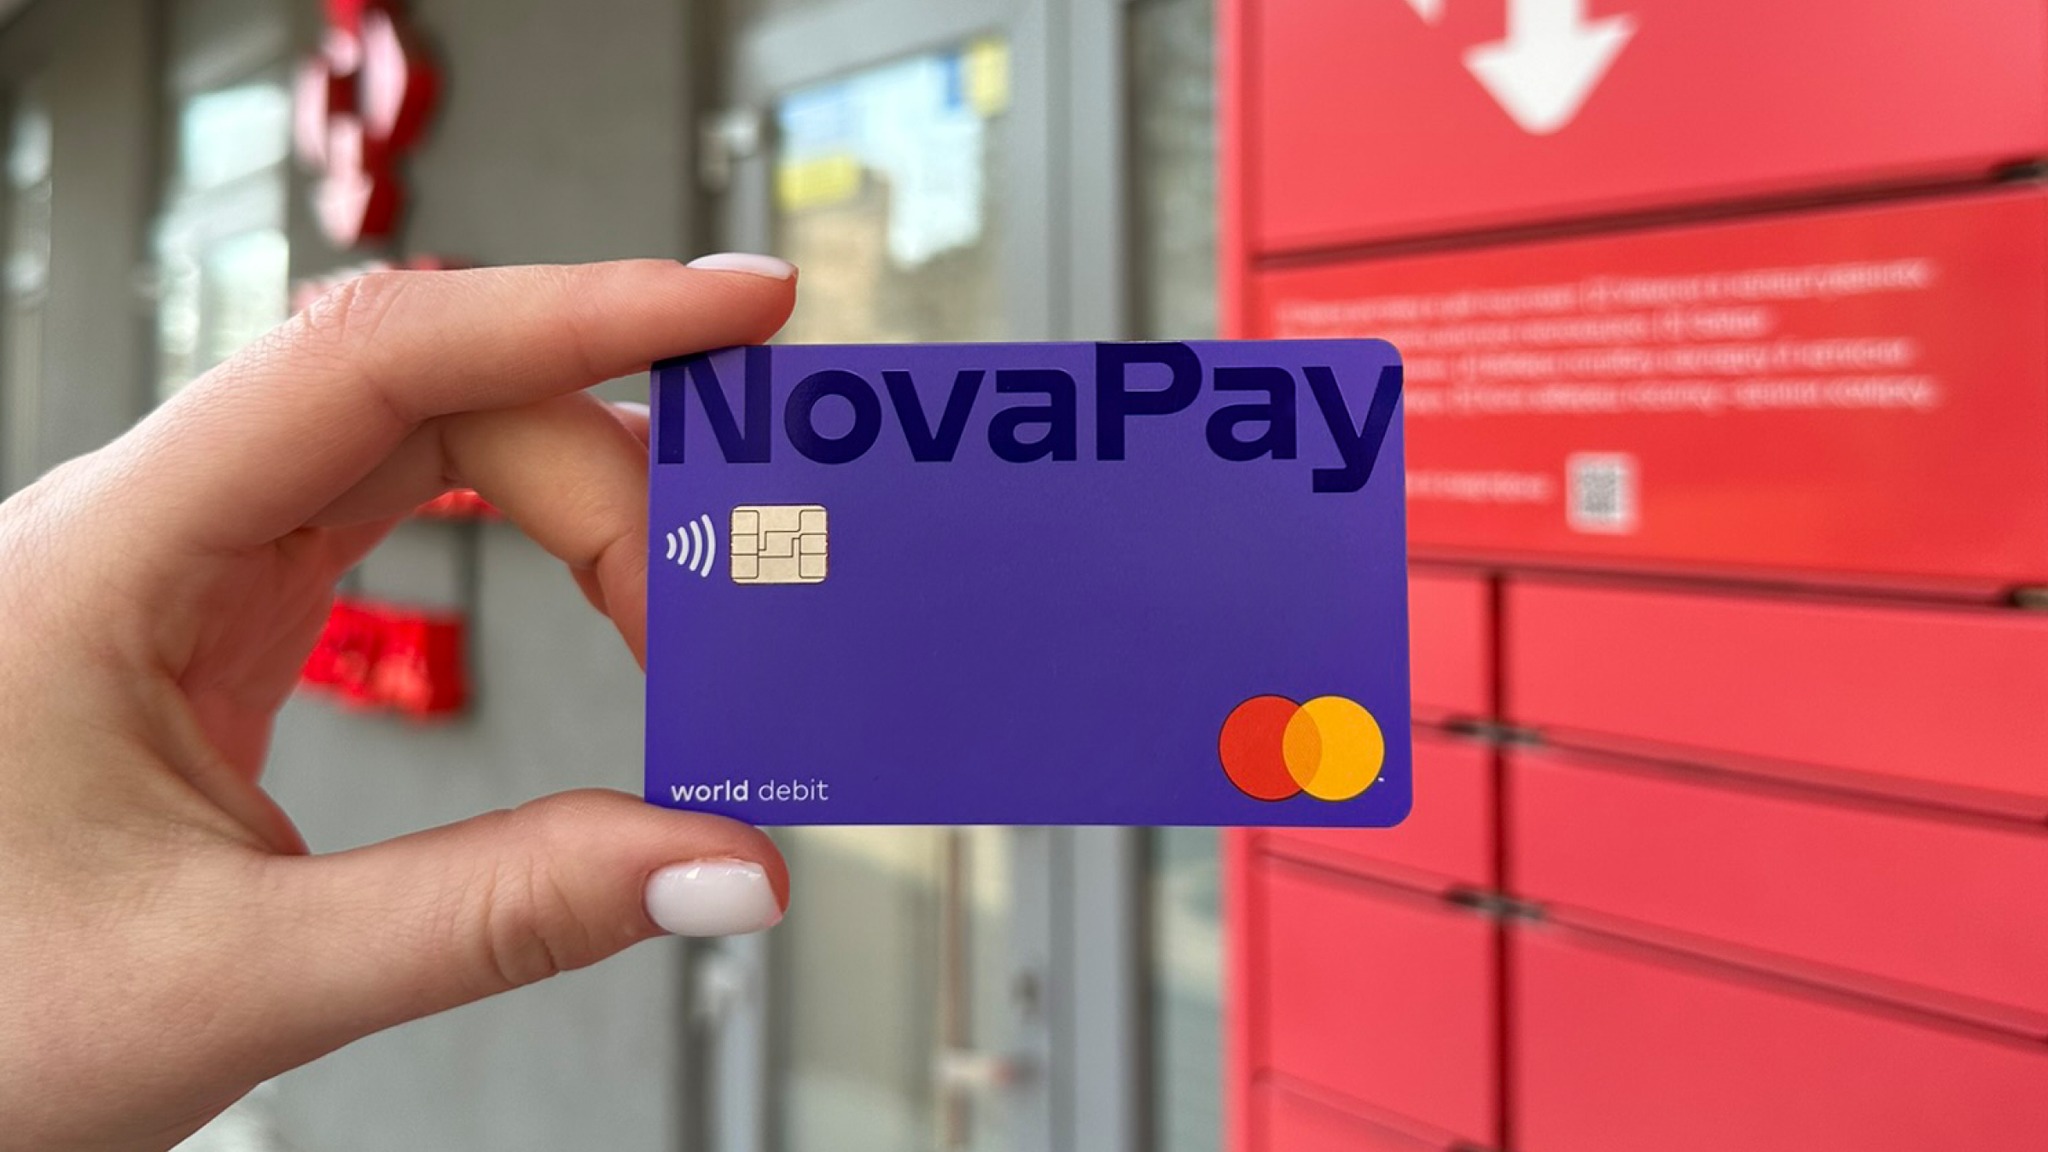 In June, NovaPay plans to launch credit lines for SMEs